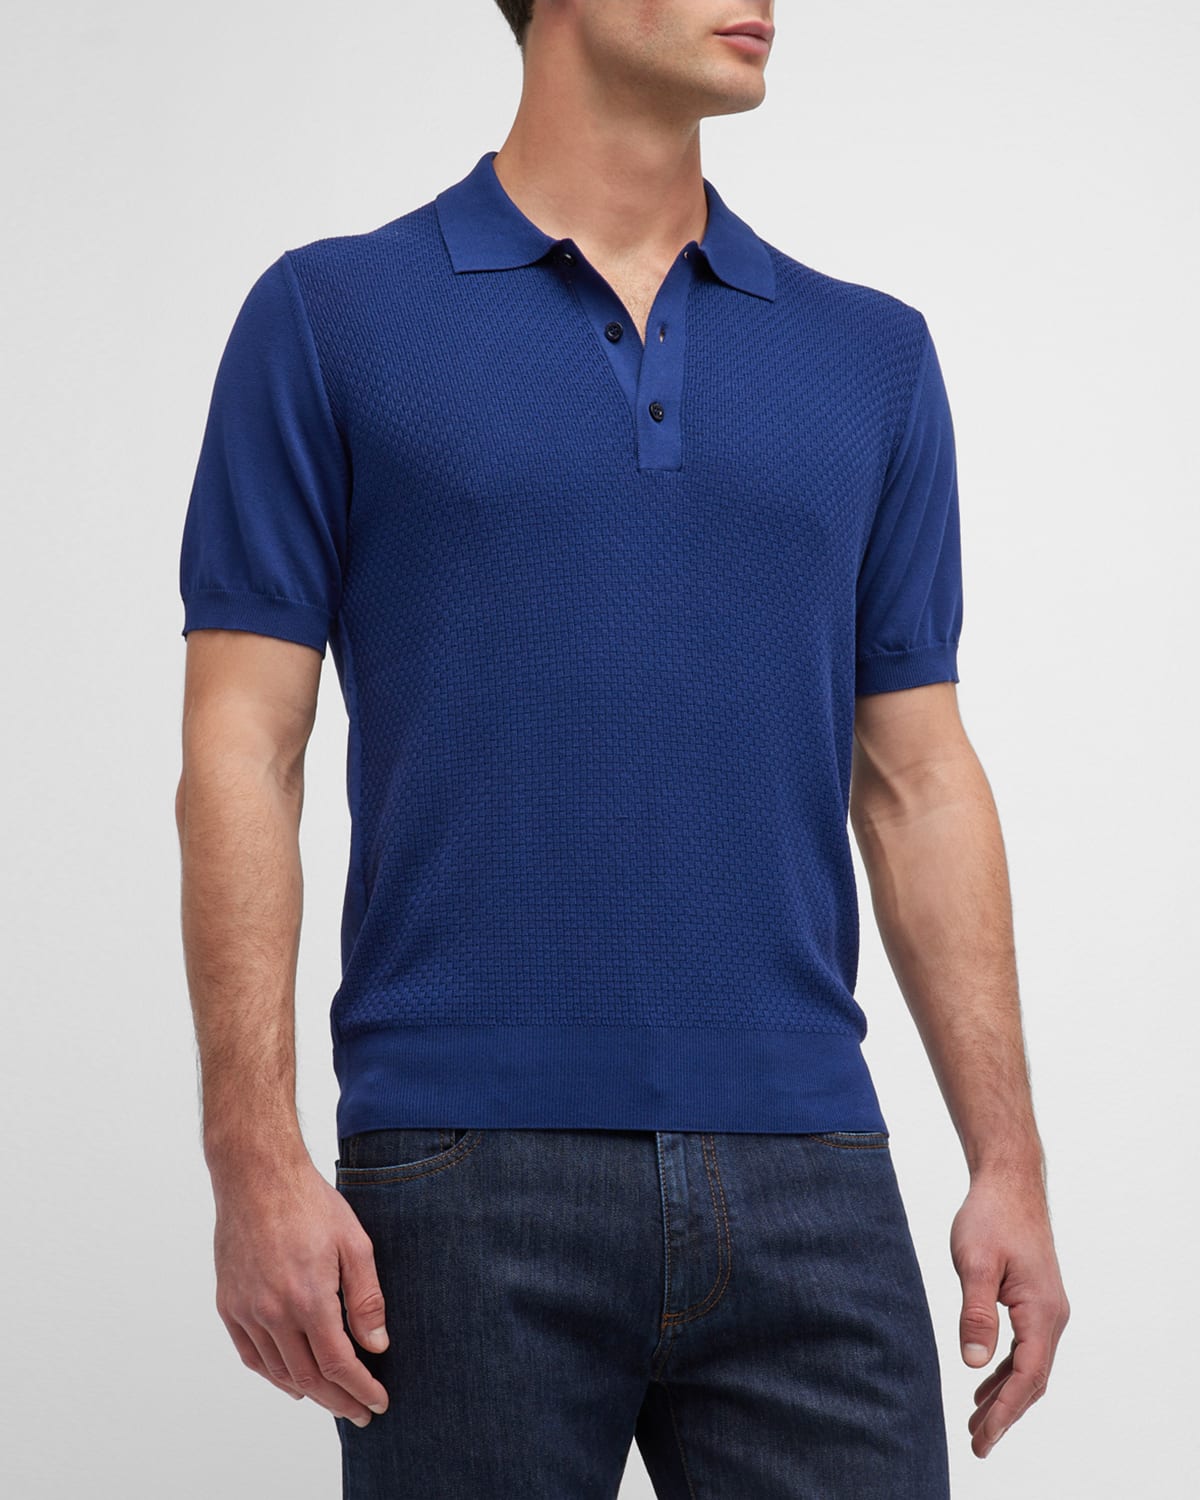 Canali Men's Solid Textured Polo Shirt